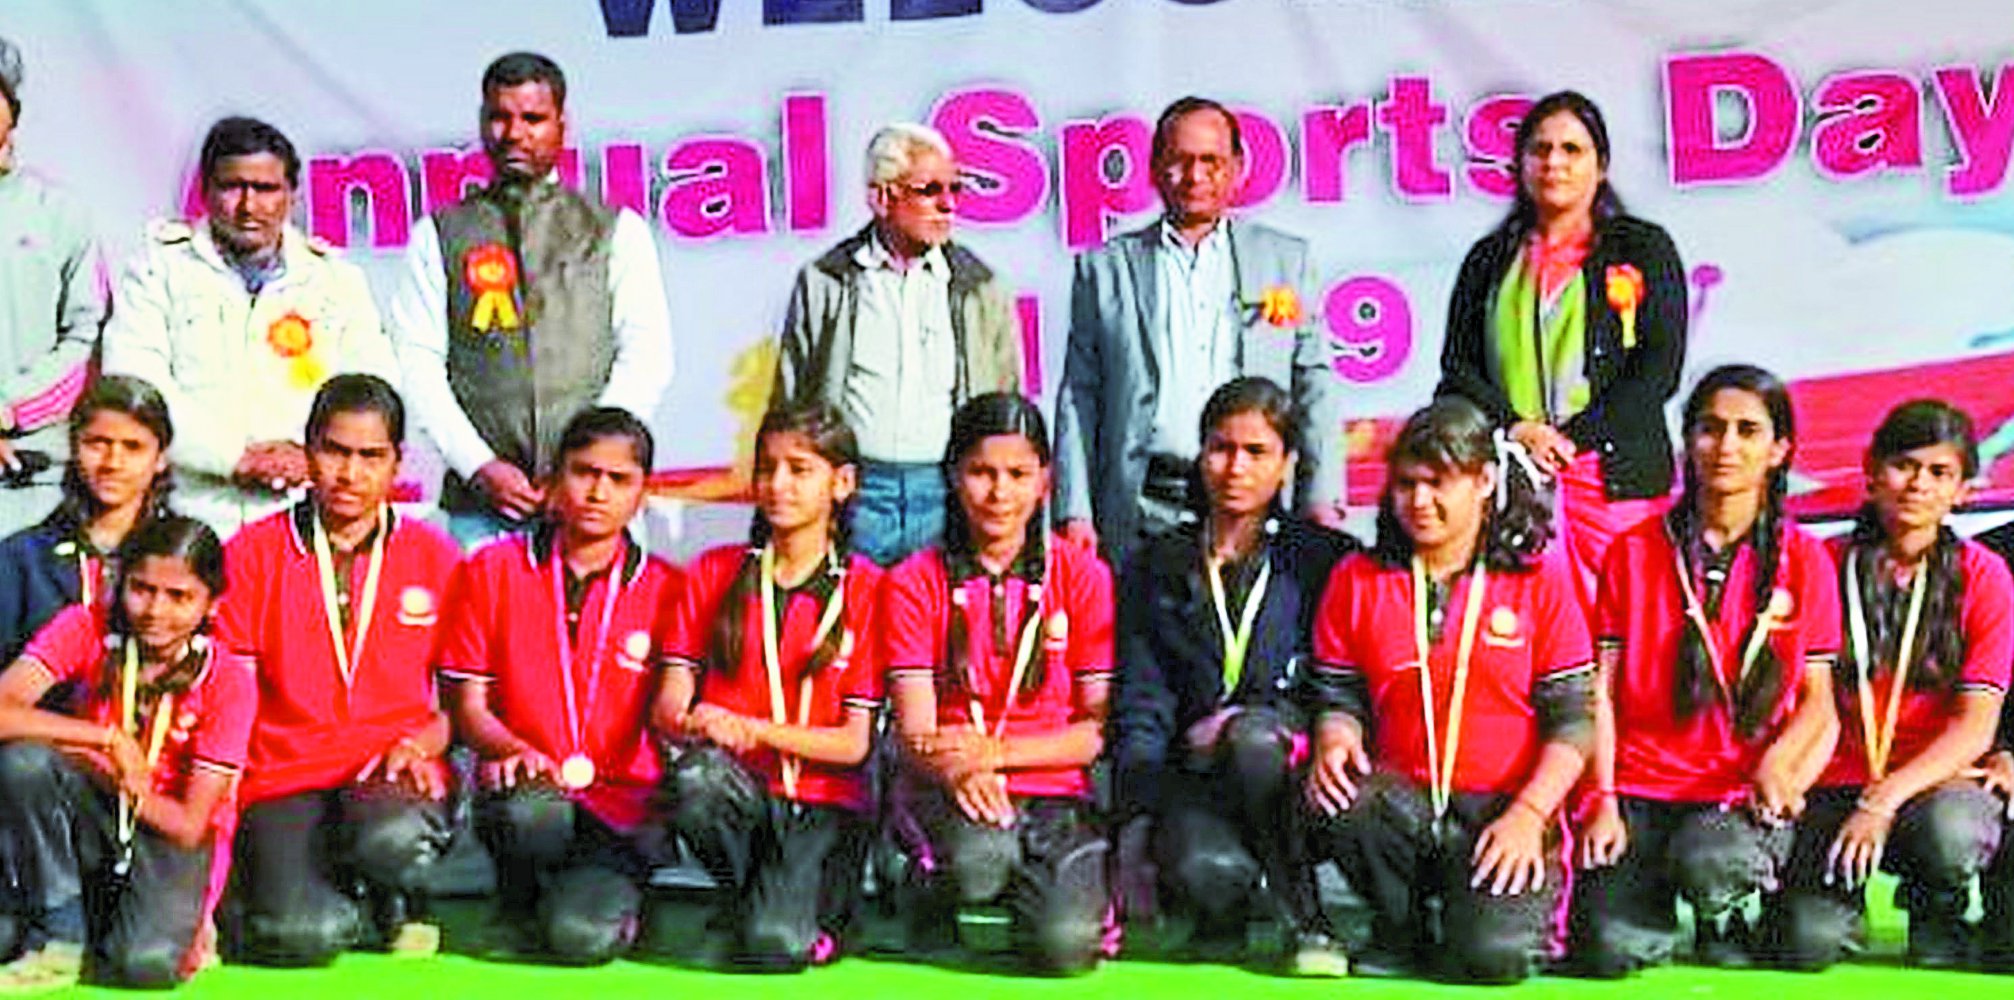 Winners of Chattarasal Stadium in District, awards, confounded faces